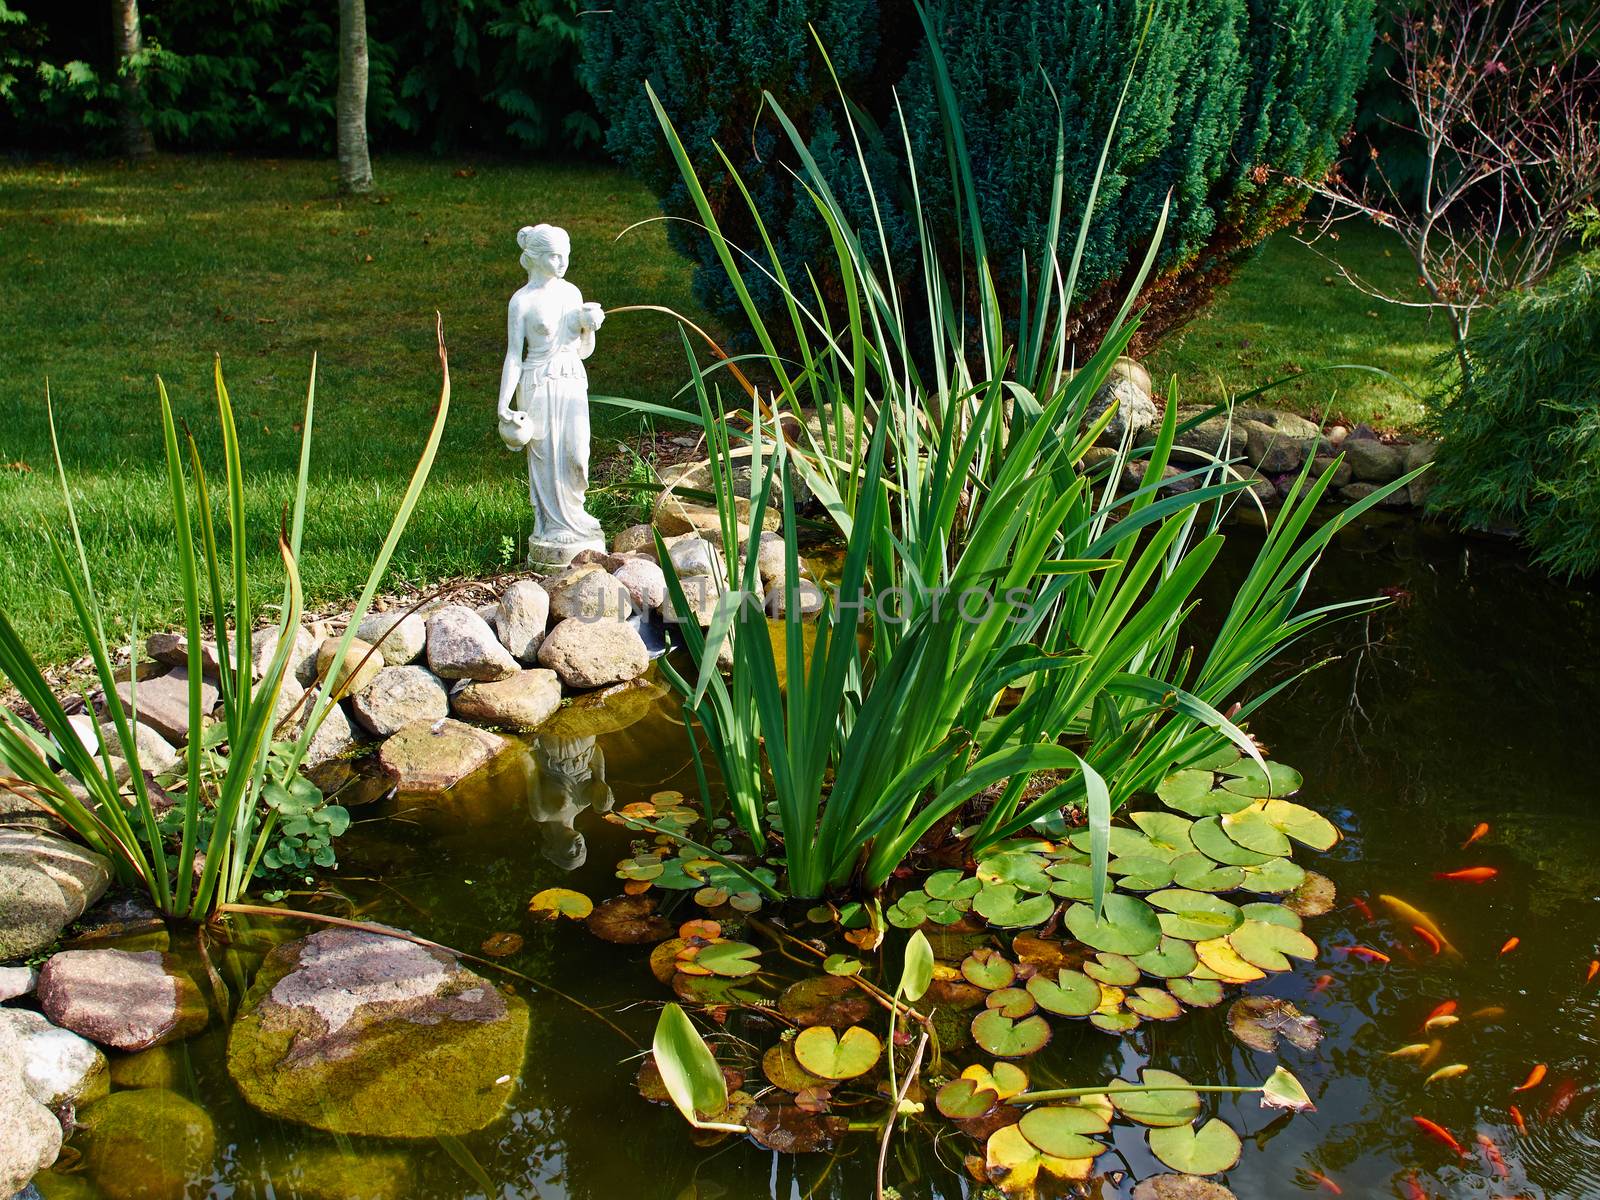 Beautiful classical garden fish pond surrounded by grass gardening background   